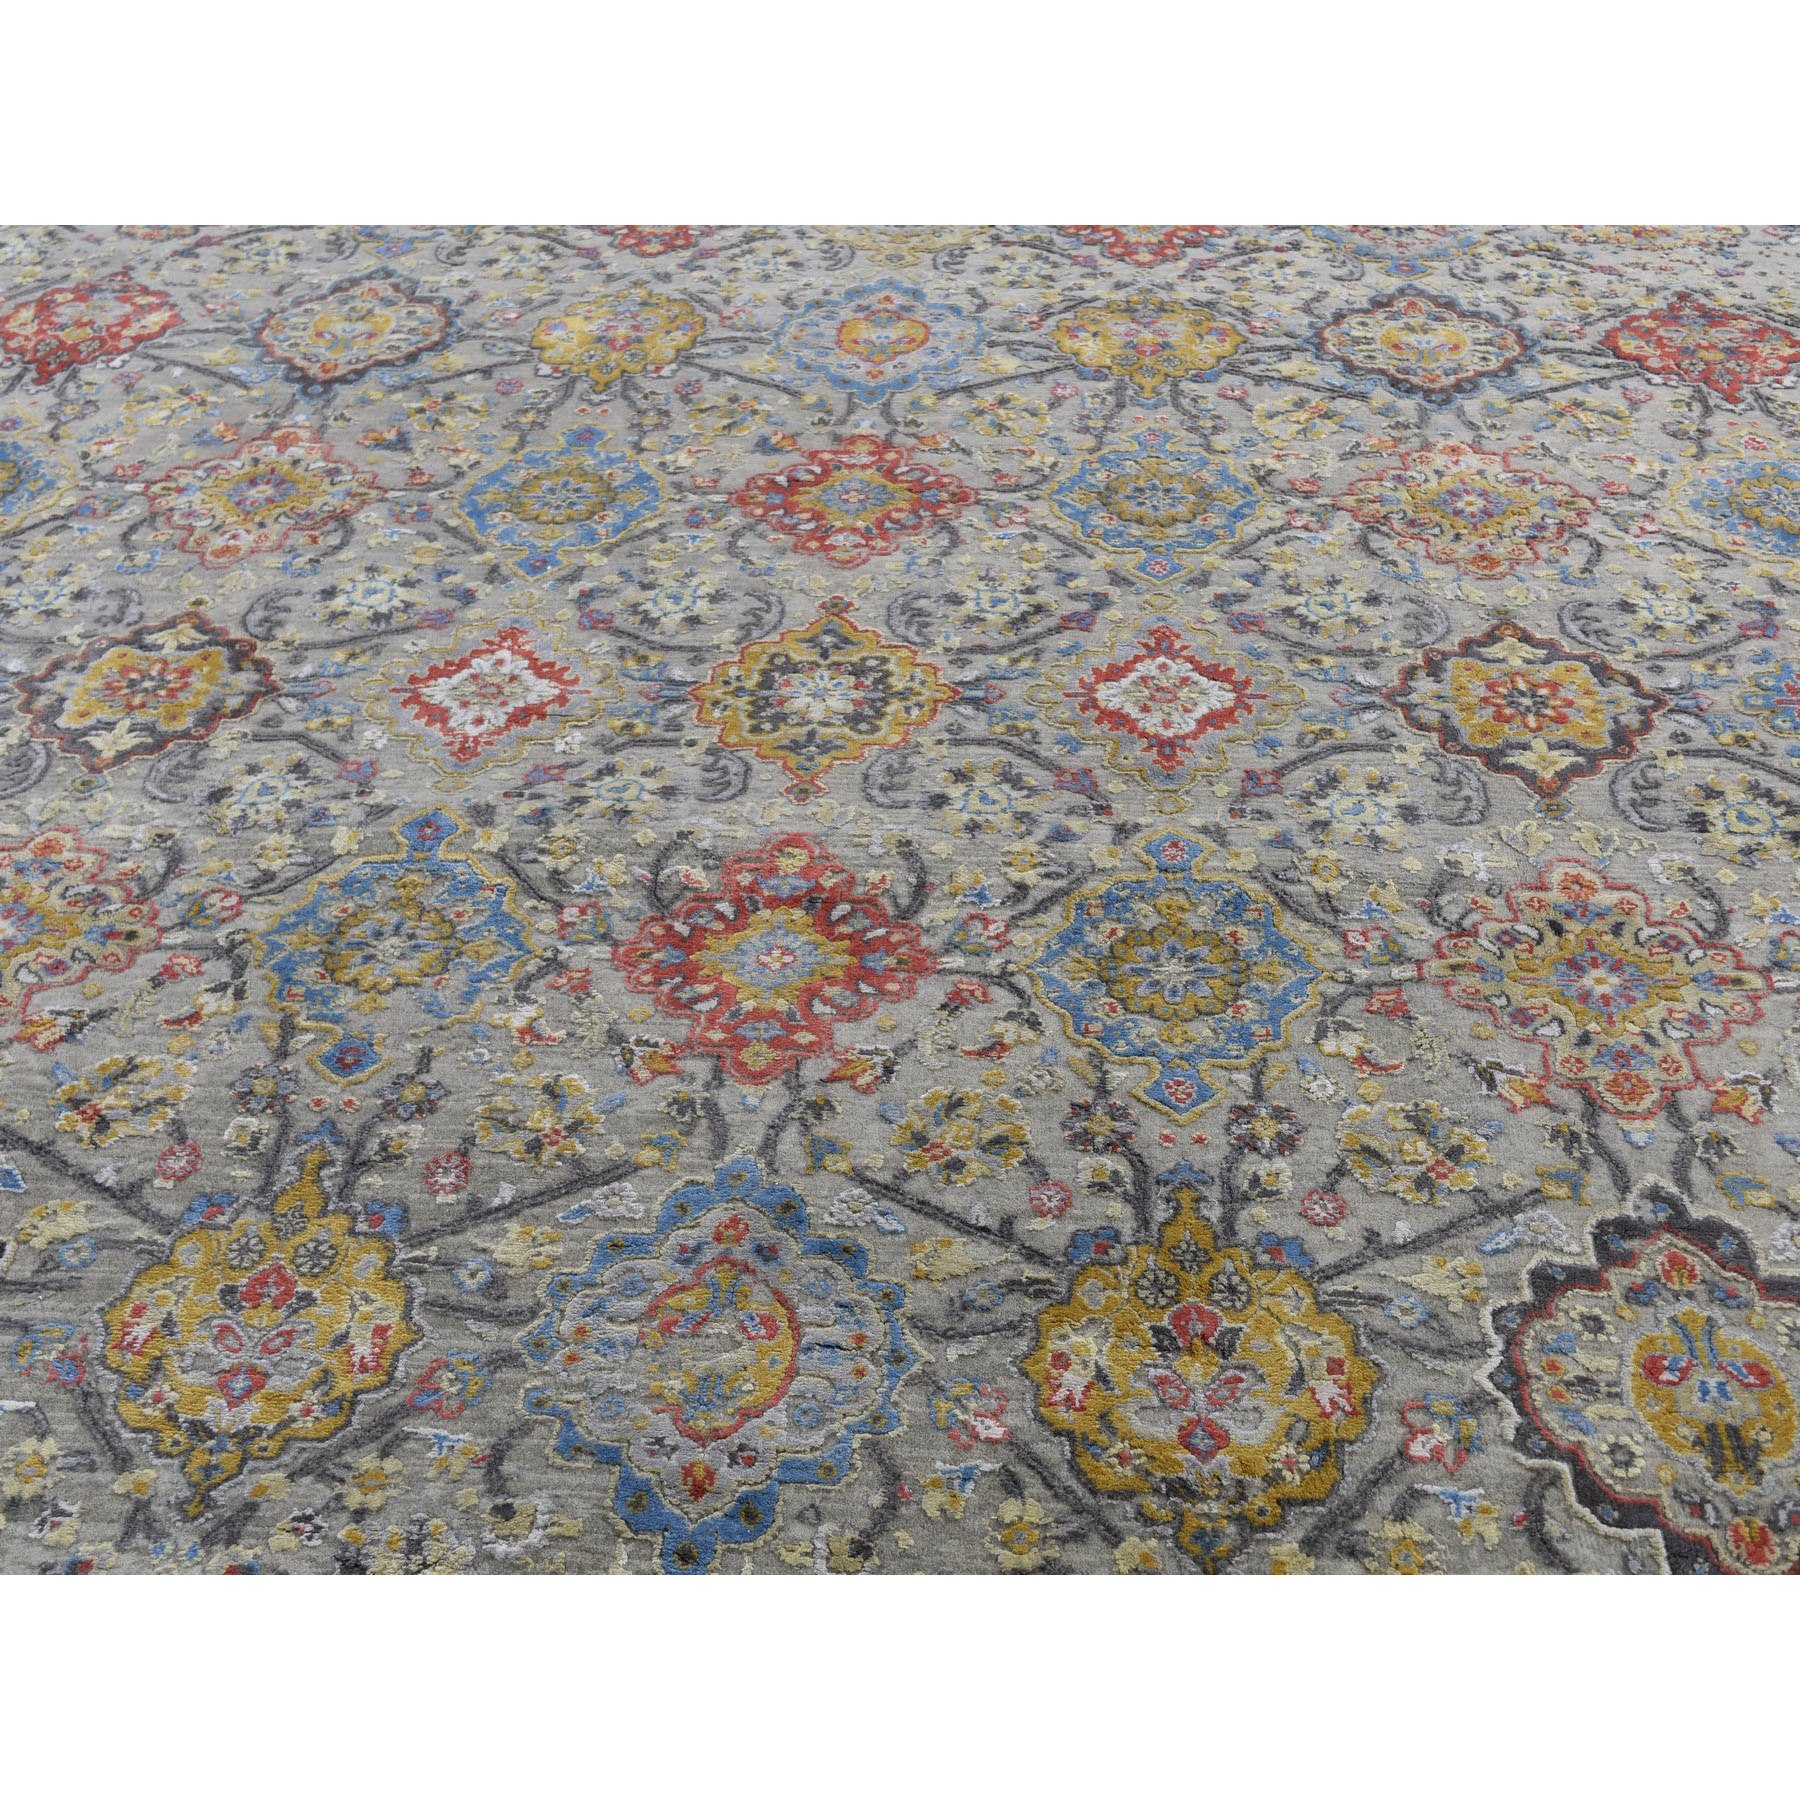 10-x14-1  THE SUNSET ROSETTES Pure Silk and Wool Hand Knotted Oriental Rug 